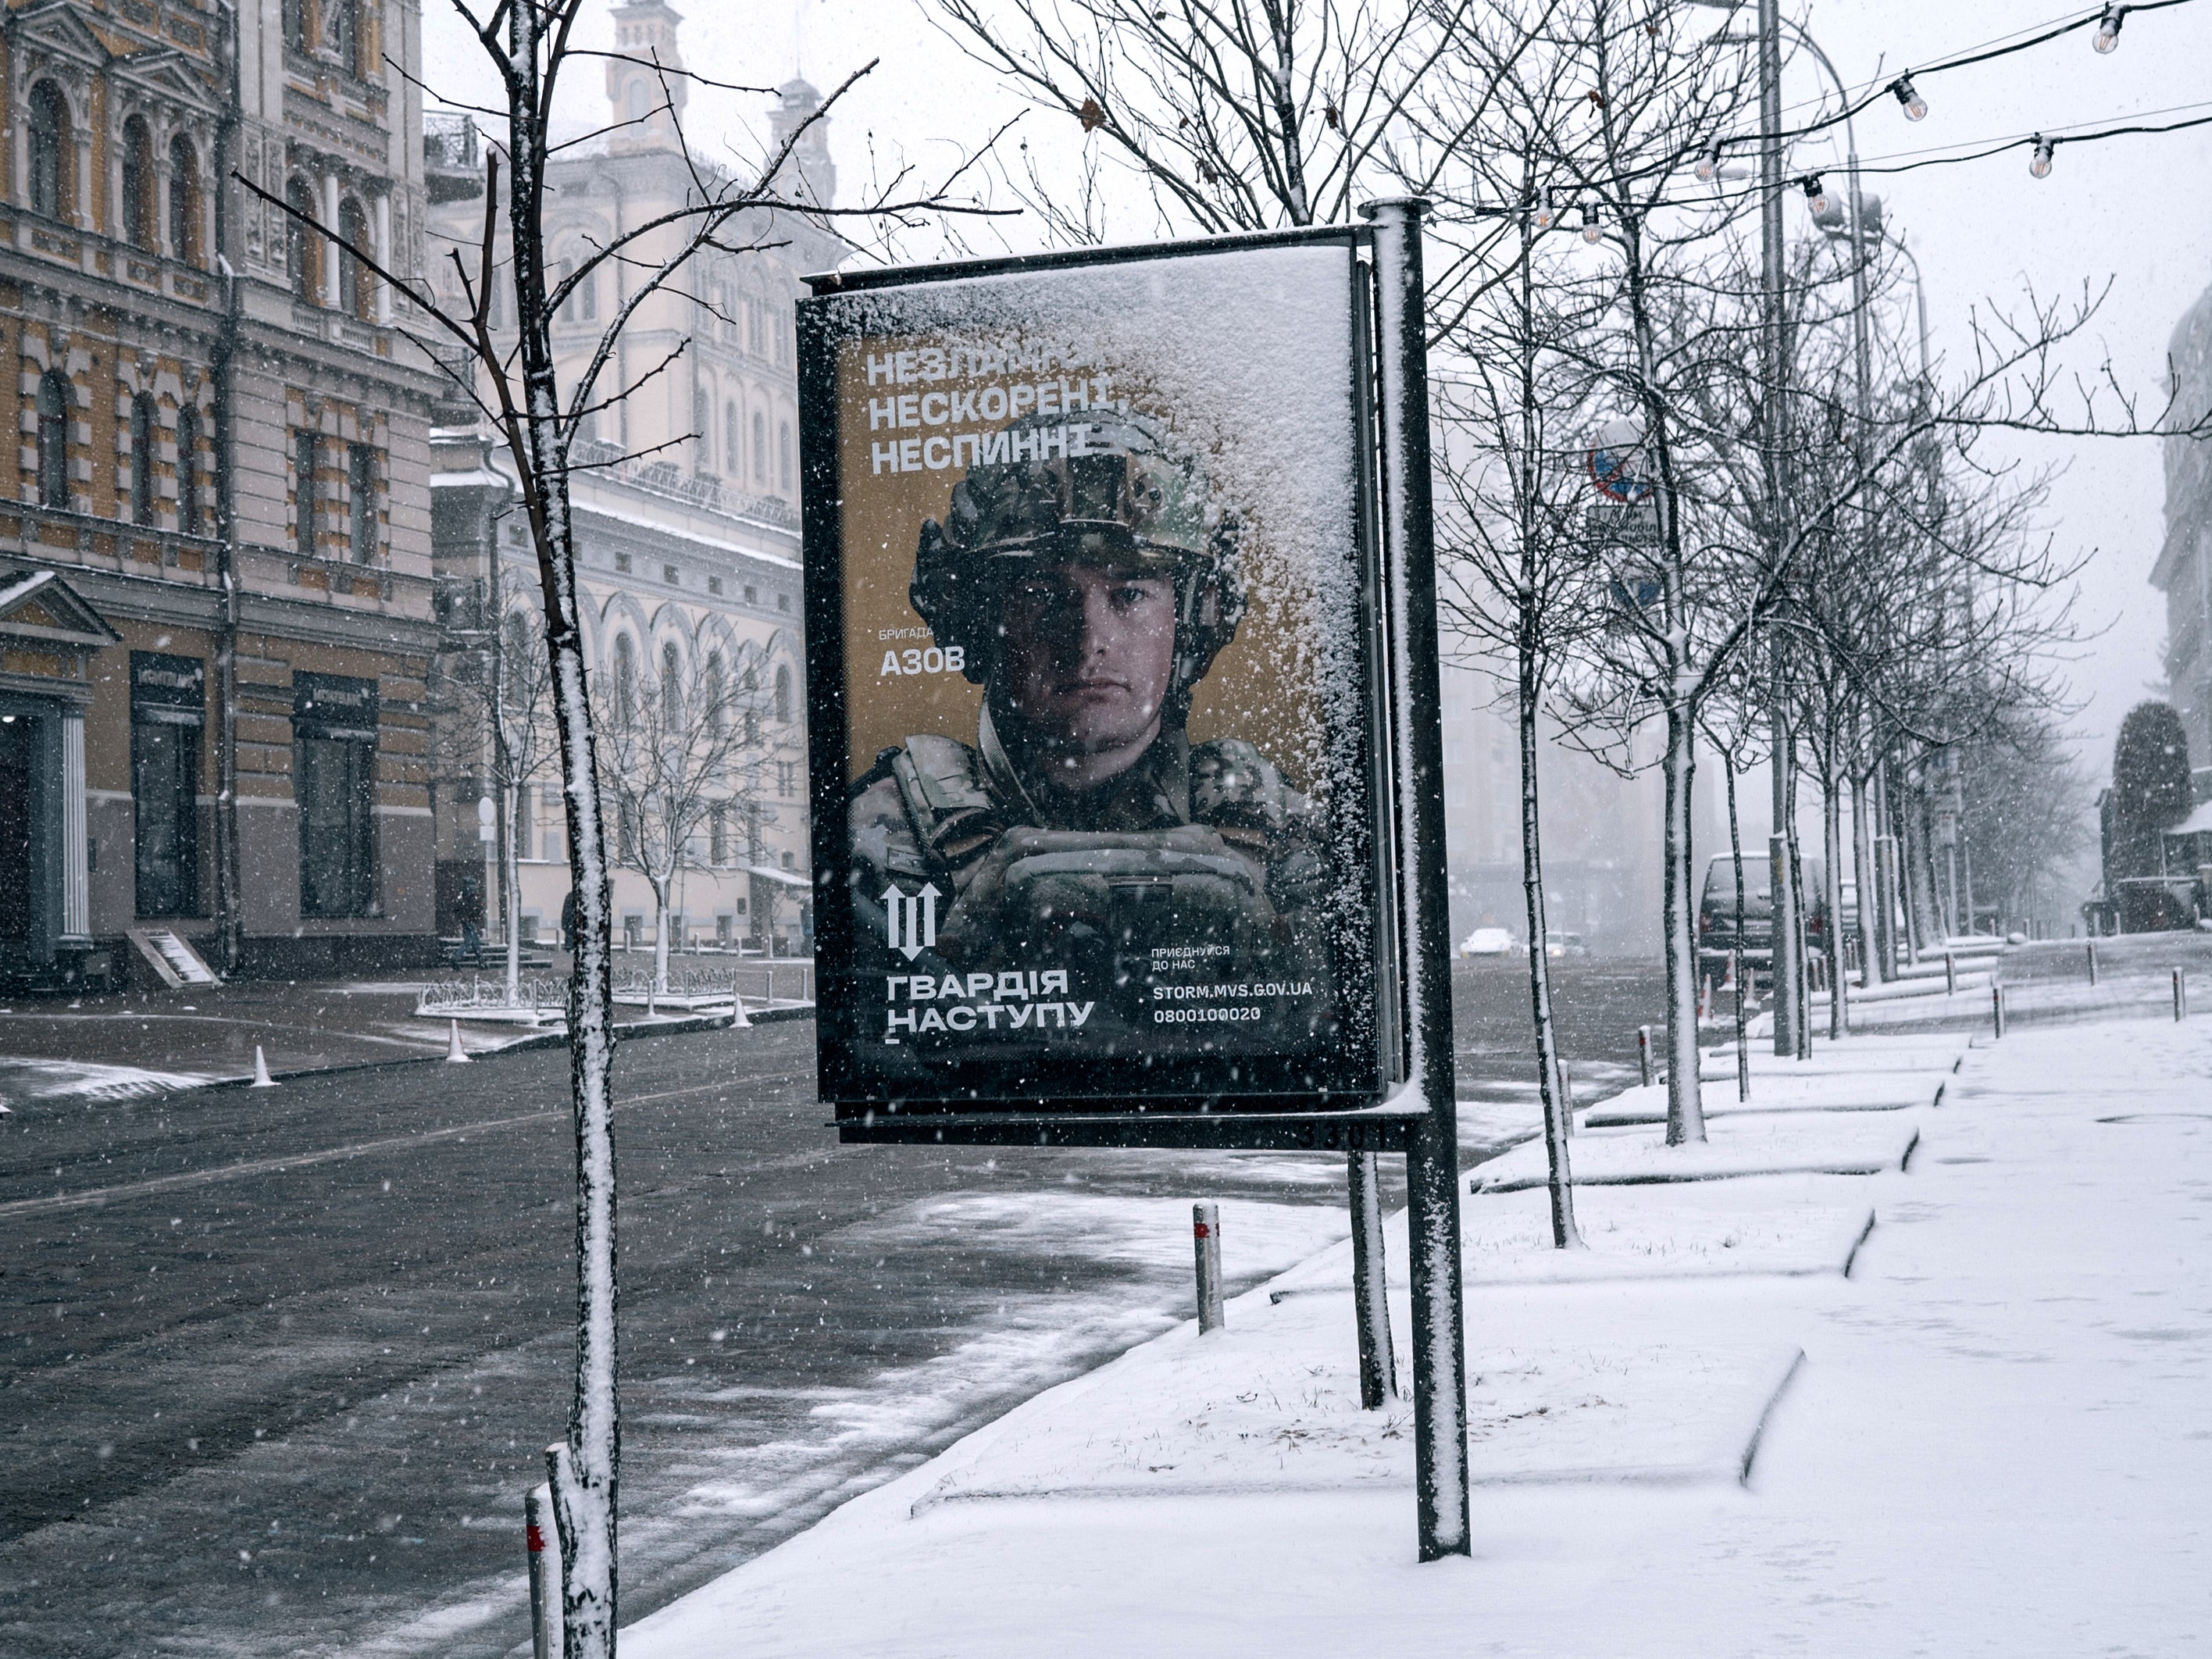 A Ukrainian armed forces mobilisation campaign poster in Kyiv reads: ‘Unbreakable, unconquered, unstoppable’